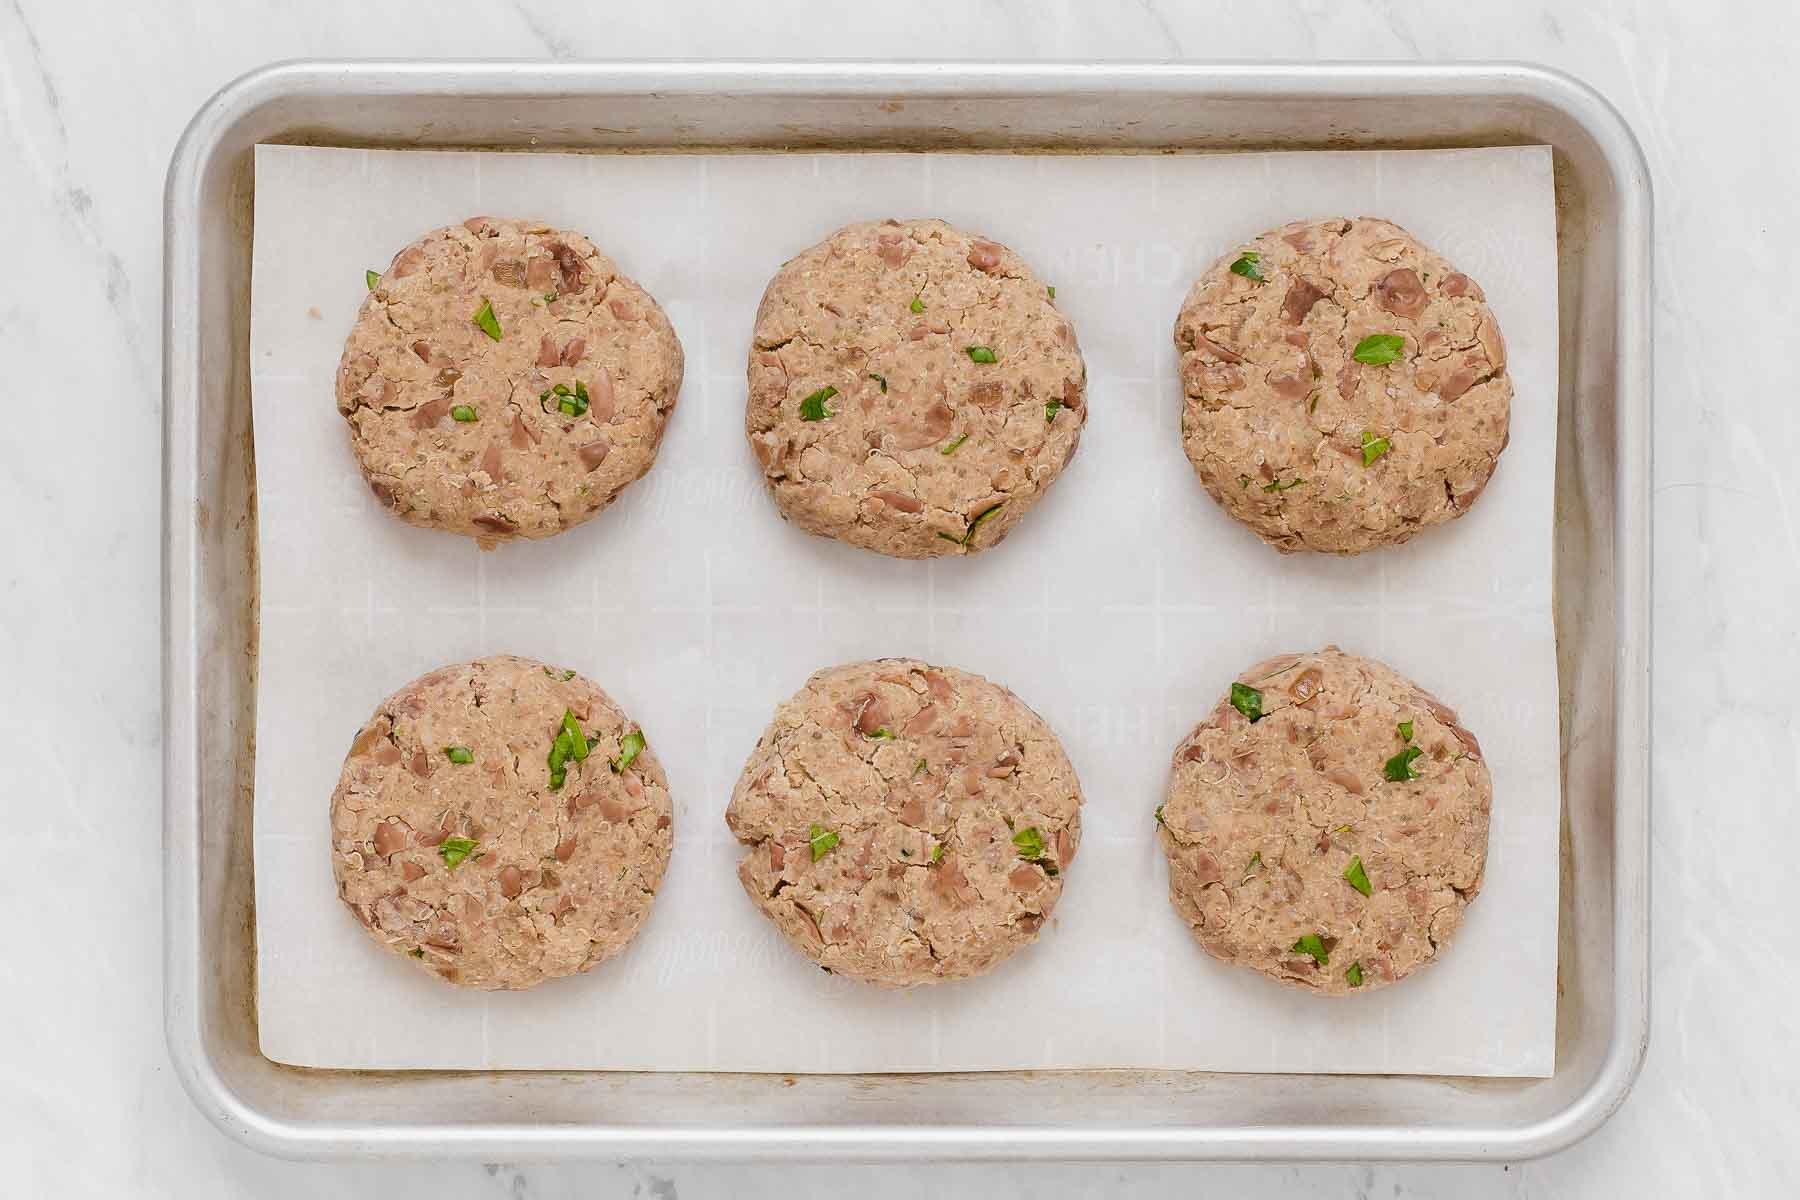 Six pinto bean burgers on a baking sheet before being cooked.